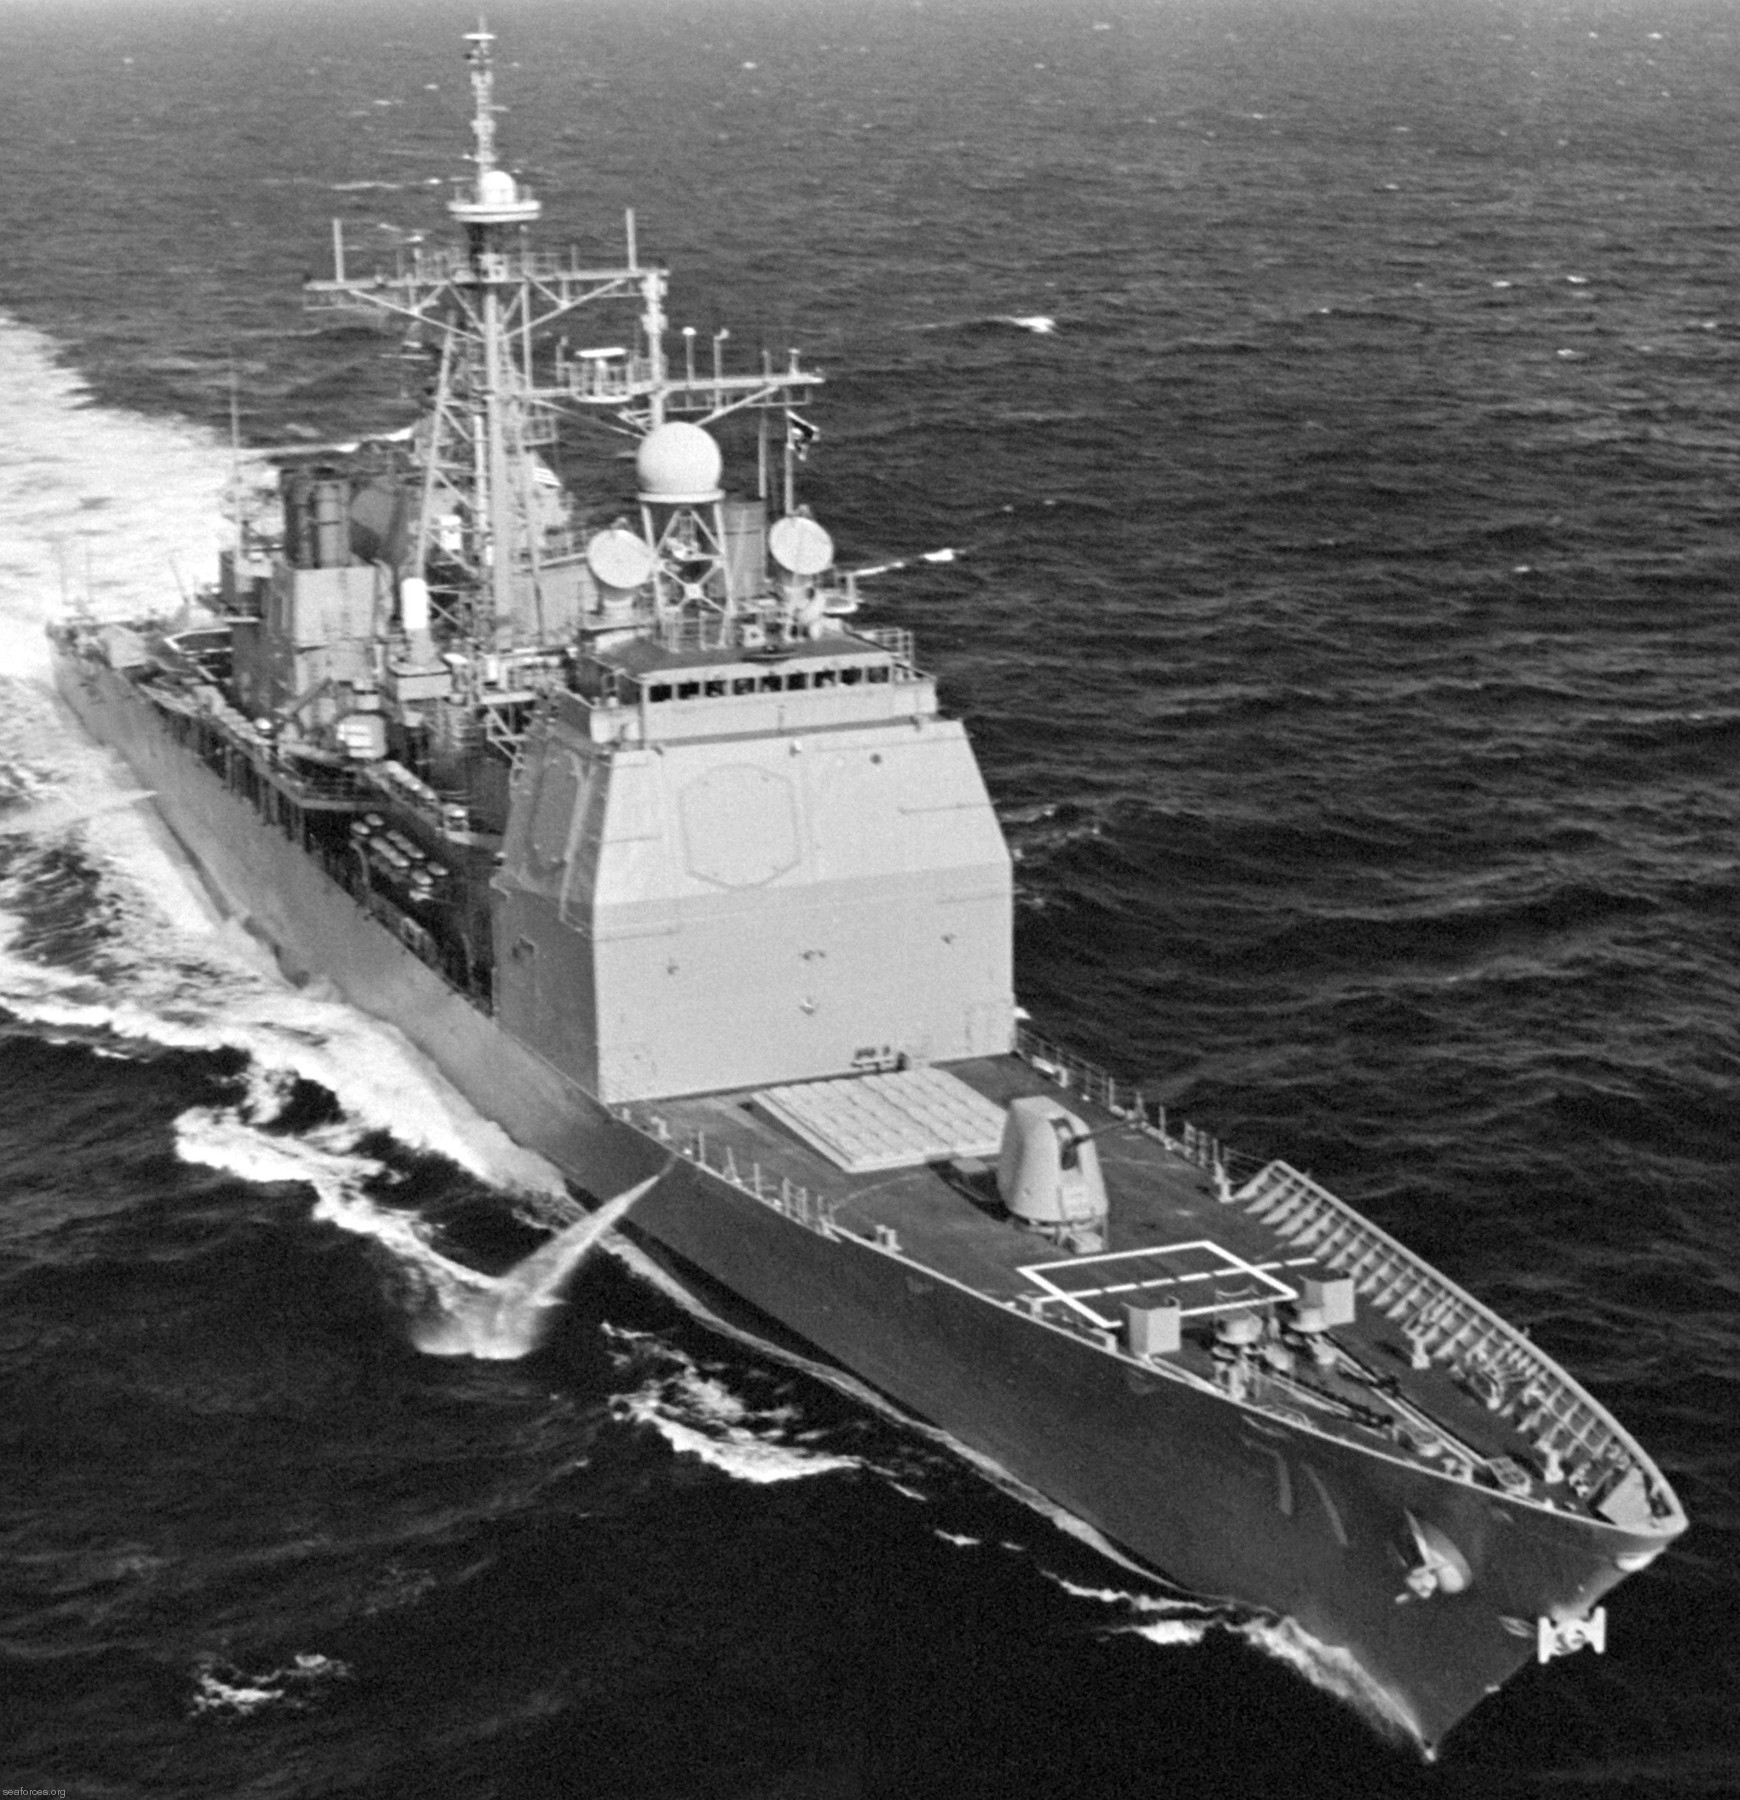 cg-71 uss cape st. george ticonderoga class guided missile cruiser us navy 72 acceptance trials 1993